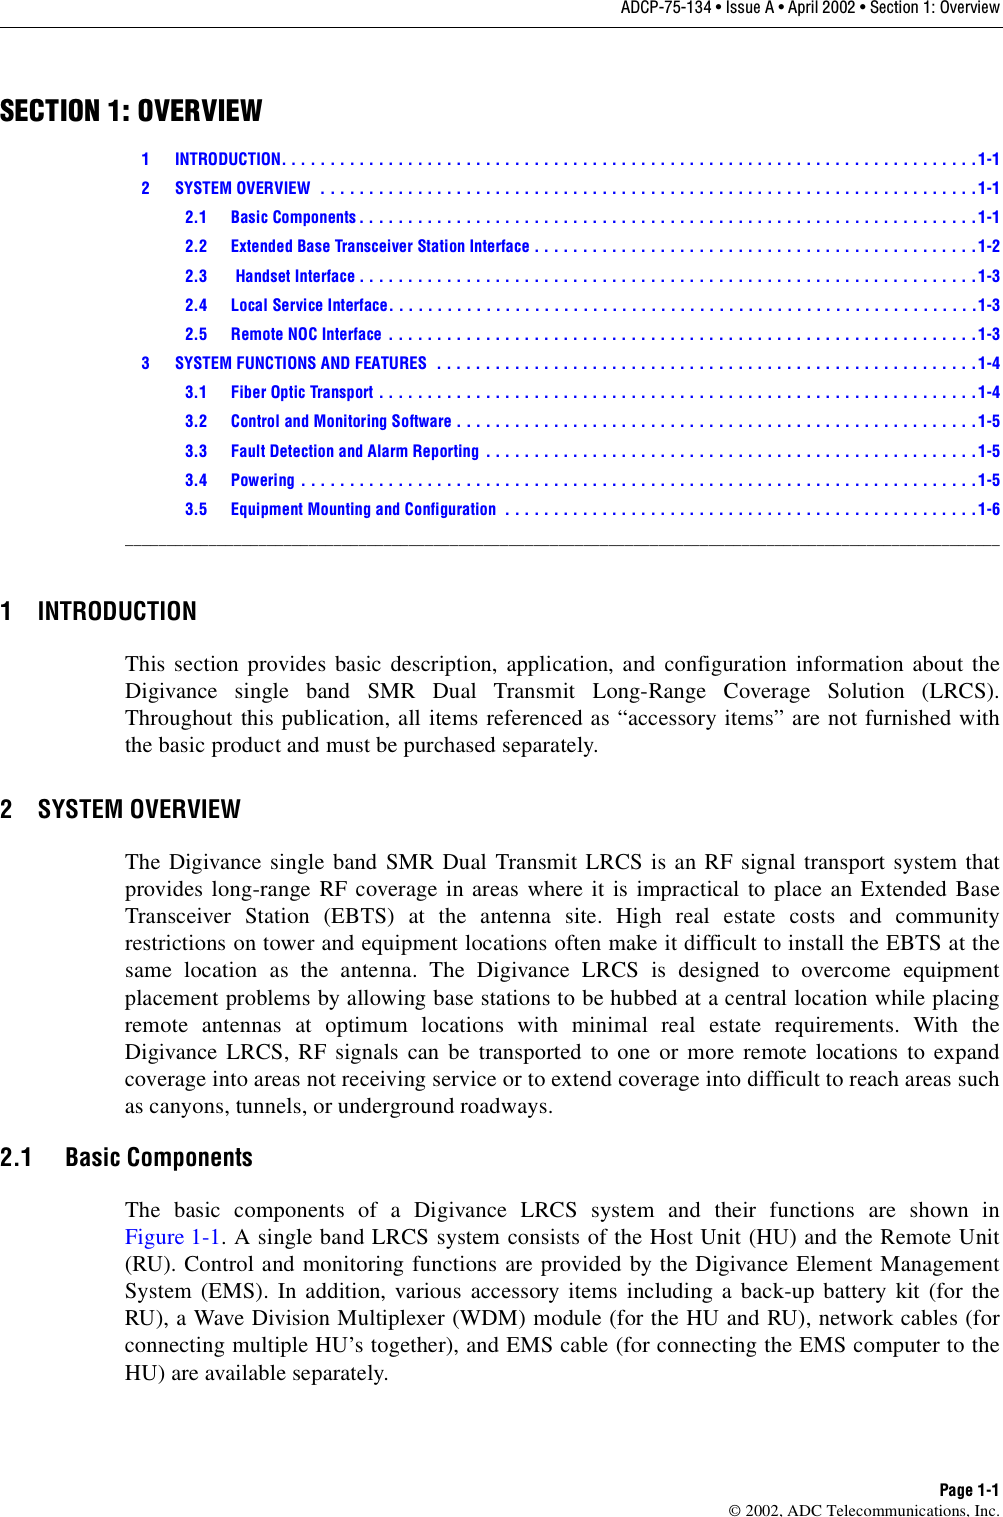 ADCP-75-134 • Issue A • April 2002 • Section 1: OverviewPage 1-1©2002, ADC Telecommunications, Inc.SECTION 1: OVERVIEW1 INTRODUCTION. . . . . . . . . . . . . . . . . . . . . . . . . . . . . . . . . . . . . . . . . . . . . . . . . . . . . . . . . . . . . . . . . . . . . . . . 1-12 SYSTEM OVERVIEW  . . . . . . . . . . . . . . . . . . . . . . . . . . . . . . . . . . . . . . . . . . . . . . . . . . . . . . . . . . . . . . . . . . . .1-12.1 Basic Components . . . . . . . . . . . . . . . . . . . . . . . . . . . . . . . . . . . . . . . . . . . . . . . . . . . . . . . . . . . . . . . .1-12.2 Extended Base Transceiver Station Interface . . . . . . . . . . . . . . . . . . . . . . . . . . . . . . . . . . . . . . . . . . . . . .1-22.3  Handset Interface . . . . . . . . . . . . . . . . . . . . . . . . . . . . . . . . . . . . . . . . . . . . . . . . . . . . . . . . . . . . . . . .1-32.4 Local Service Interface. . . . . . . . . . . . . . . . . . . . . . . . . . . . . . . . . . . . . . . . . . . . . . . . . . . . . . . . . . . . .1-32.5 Remote NOC Interface . . . . . . . . . . . . . . . . . . . . . . . . . . . . . . . . . . . . . . . . . . . . . . . . . . . . . . . . . . . . .1-33 SYSTEM FUNCTIONS AND FEATURES  . . . . . . . . . . . . . . . . . . . . . . . . . . . . . . . . . . . . . . . . . . . . . . . . . . . . . . . .1-43.1 Fiber Optic Transport . . . . . . . . . . . . . . . . . . . . . . . . . . . . . . . . . . . . . . . . . . . . . . . . . . . . . . . . . . . . . . 1-43.2 Control and Monitoring Software . . . . . . . . . . . . . . . . . . . . . . . . . . . . . . . . . . . . . . . . . . . . . . . . . . . . . .1-53.3 Fault Detection and Alarm Reporting . . . . . . . . . . . . . . . . . . . . . . . . . . . . . . . . . . . . . . . . . . . . . . . . . . .1-53.4 Powering . . . . . . . . . . . . . . . . . . . . . . . . . . . . . . . . . . . . . . . . . . . . . . . . . . . . . . . . . . . . . . . . . . . . . . 1-53.5 Equipment Mounting and Configuration  . . . . . . . . . . . . . . . . . . . . . . . . . . . . . . . . . . . . . . . . . . . . . . . . .1-6_________________________________________________________________________________________________________1 INTRODUCTIONThis section provides basic description, application, and configuration information about theDigivance single band SMR Dual Transmit Long-Range Coverage Solution (LRCS).Throughout this publication, all items referenced as “accessory items” are not furnished withthe basic product and must be purchased separately.2 SYSTEM OVERVIEWThe Digivance single band SMR Dual Transmit LRCS is an RF signal transport system thatprovides long-range RF coverage in areas where it is impractical to place an Extended BaseTransceiver Station (EBTS) at the antenna site. High real estate costs and communityrestrictions on tower and equipment locations often make it difficult to install the EBTS at thesame location as the antenna. The Digivance LRCS is designed to overcome equipmentplacement problems by allowing base stations to be hubbed at acentral location while placingremote antennas at optimum locations with minimal real estate requirements. With theDigivance LRCS, RF signals can be transported to one or more remote locations to expandcoverage into areas not receiving service or to extend coverage into difficult to reach areas suchas canyons, tunnels, or underground roadways.2.1 Basic ComponentsThe basic components of aDigivance LRCS system and their functions are shown inFigure 1-1. A single band LRCS system consists of the Host Unit (HU) and the Remote Unit(RU). Control and monitoring functions are provided by the Digivance Element ManagementSystem (EMS). In addition, various accessory items including aback-up battery kit (for theRU), aWave Division Multiplexer (WDM) module (for the HU and RU), network cables (forconnecting multiple HU’s together), and EMS cable (for connecting the EMS computer to theHU) are available separately.